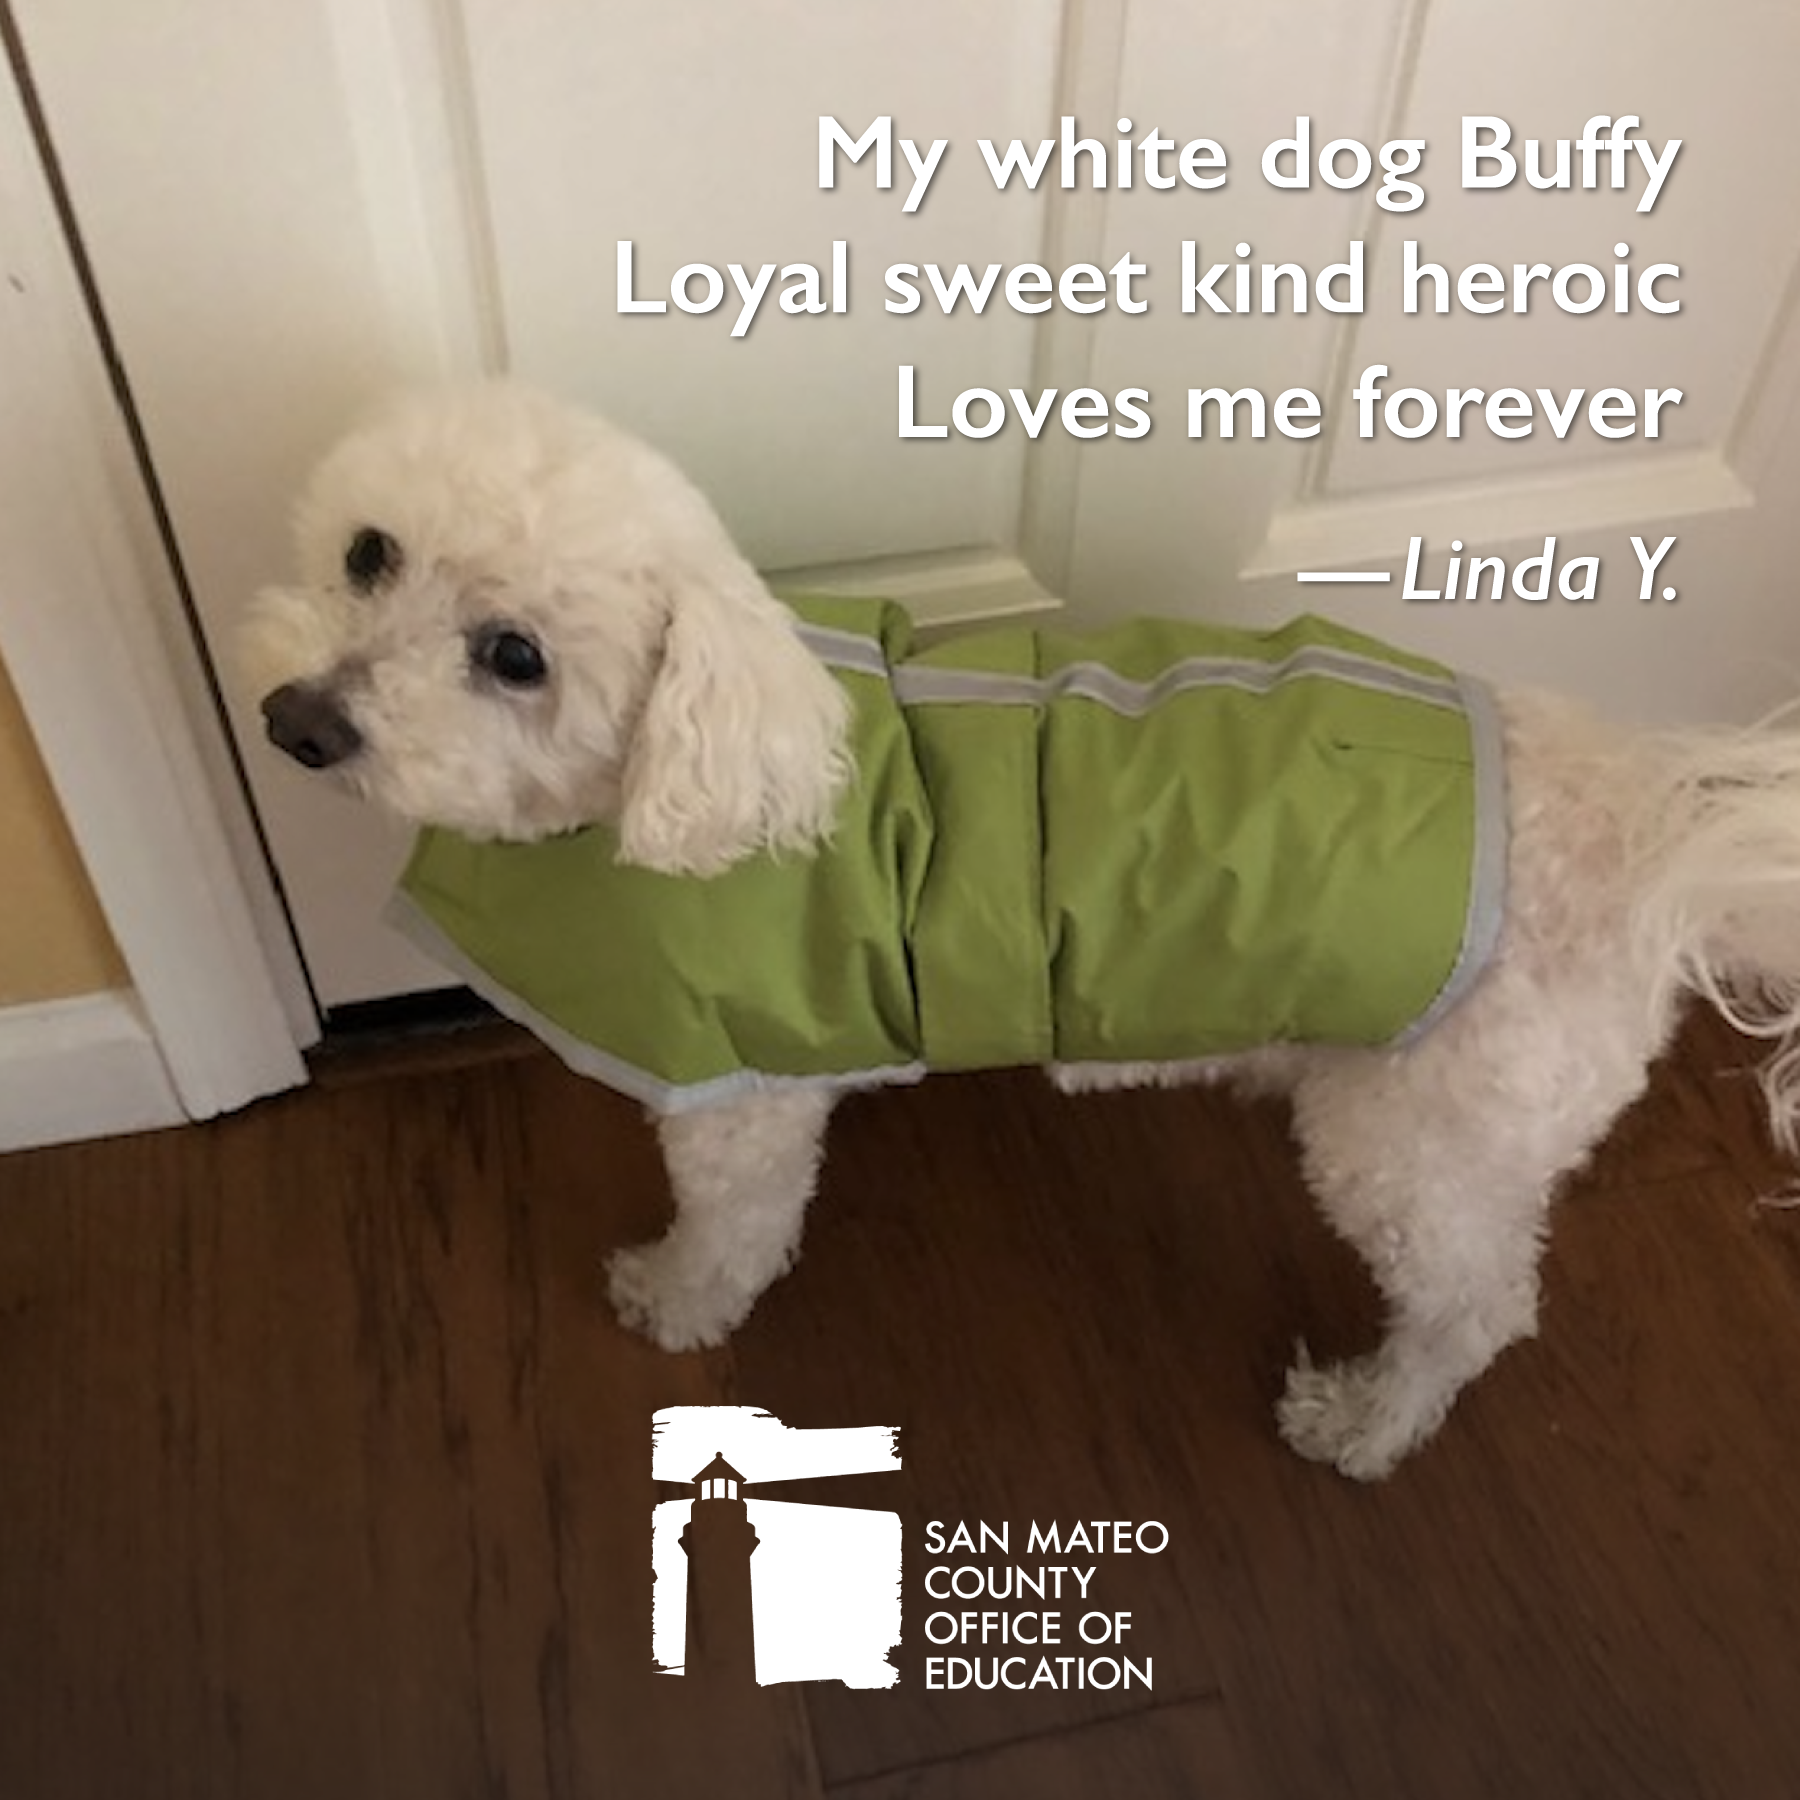 My white dog Buffy Loyal sweet kind heroic Loves me forever. Written by Linda Y.